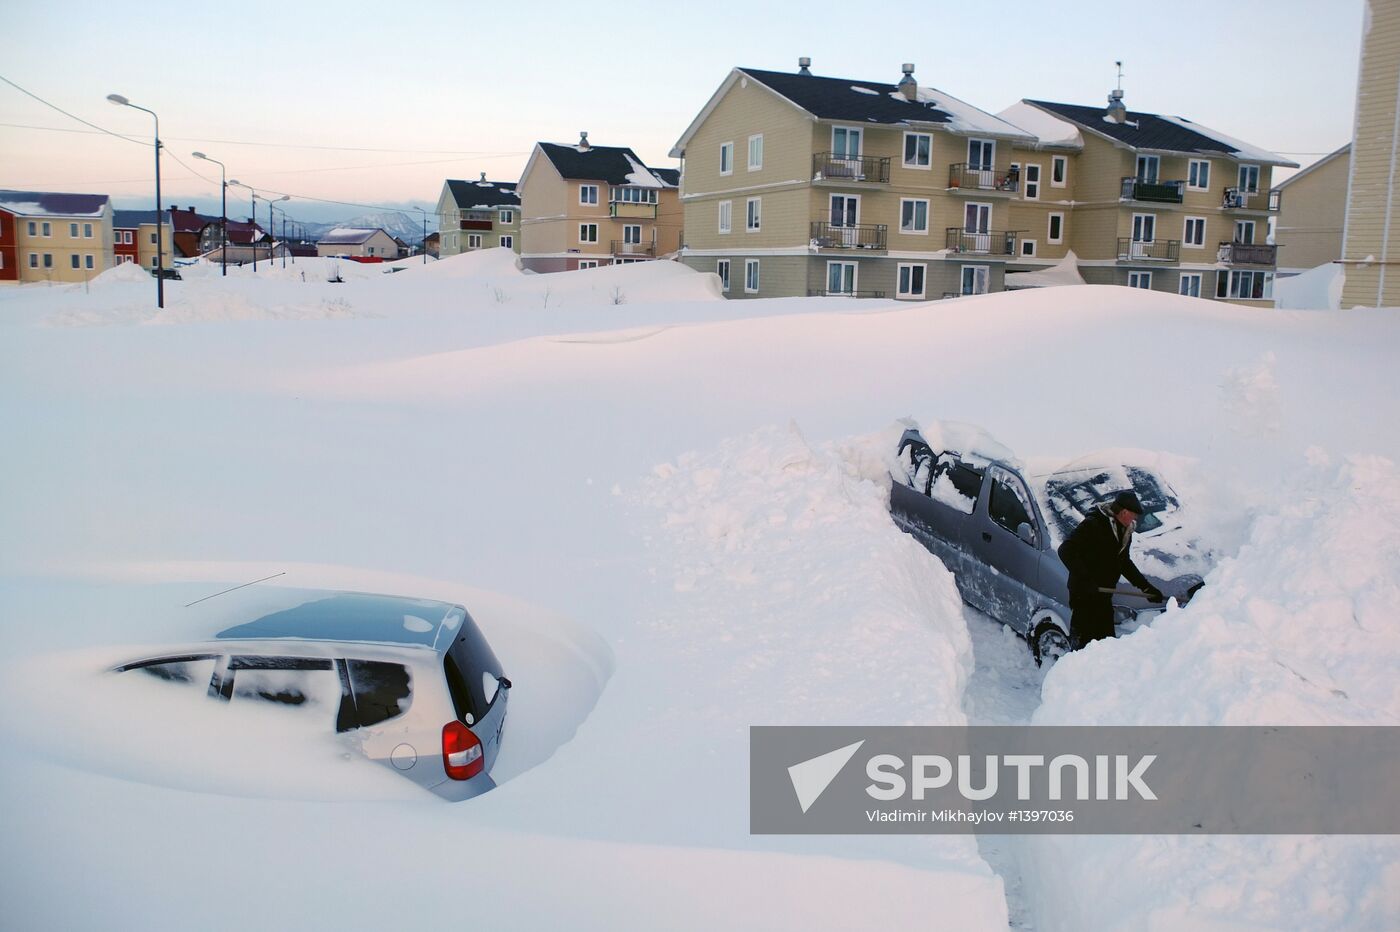 Aftermath of a snowstorm in Sakhalin